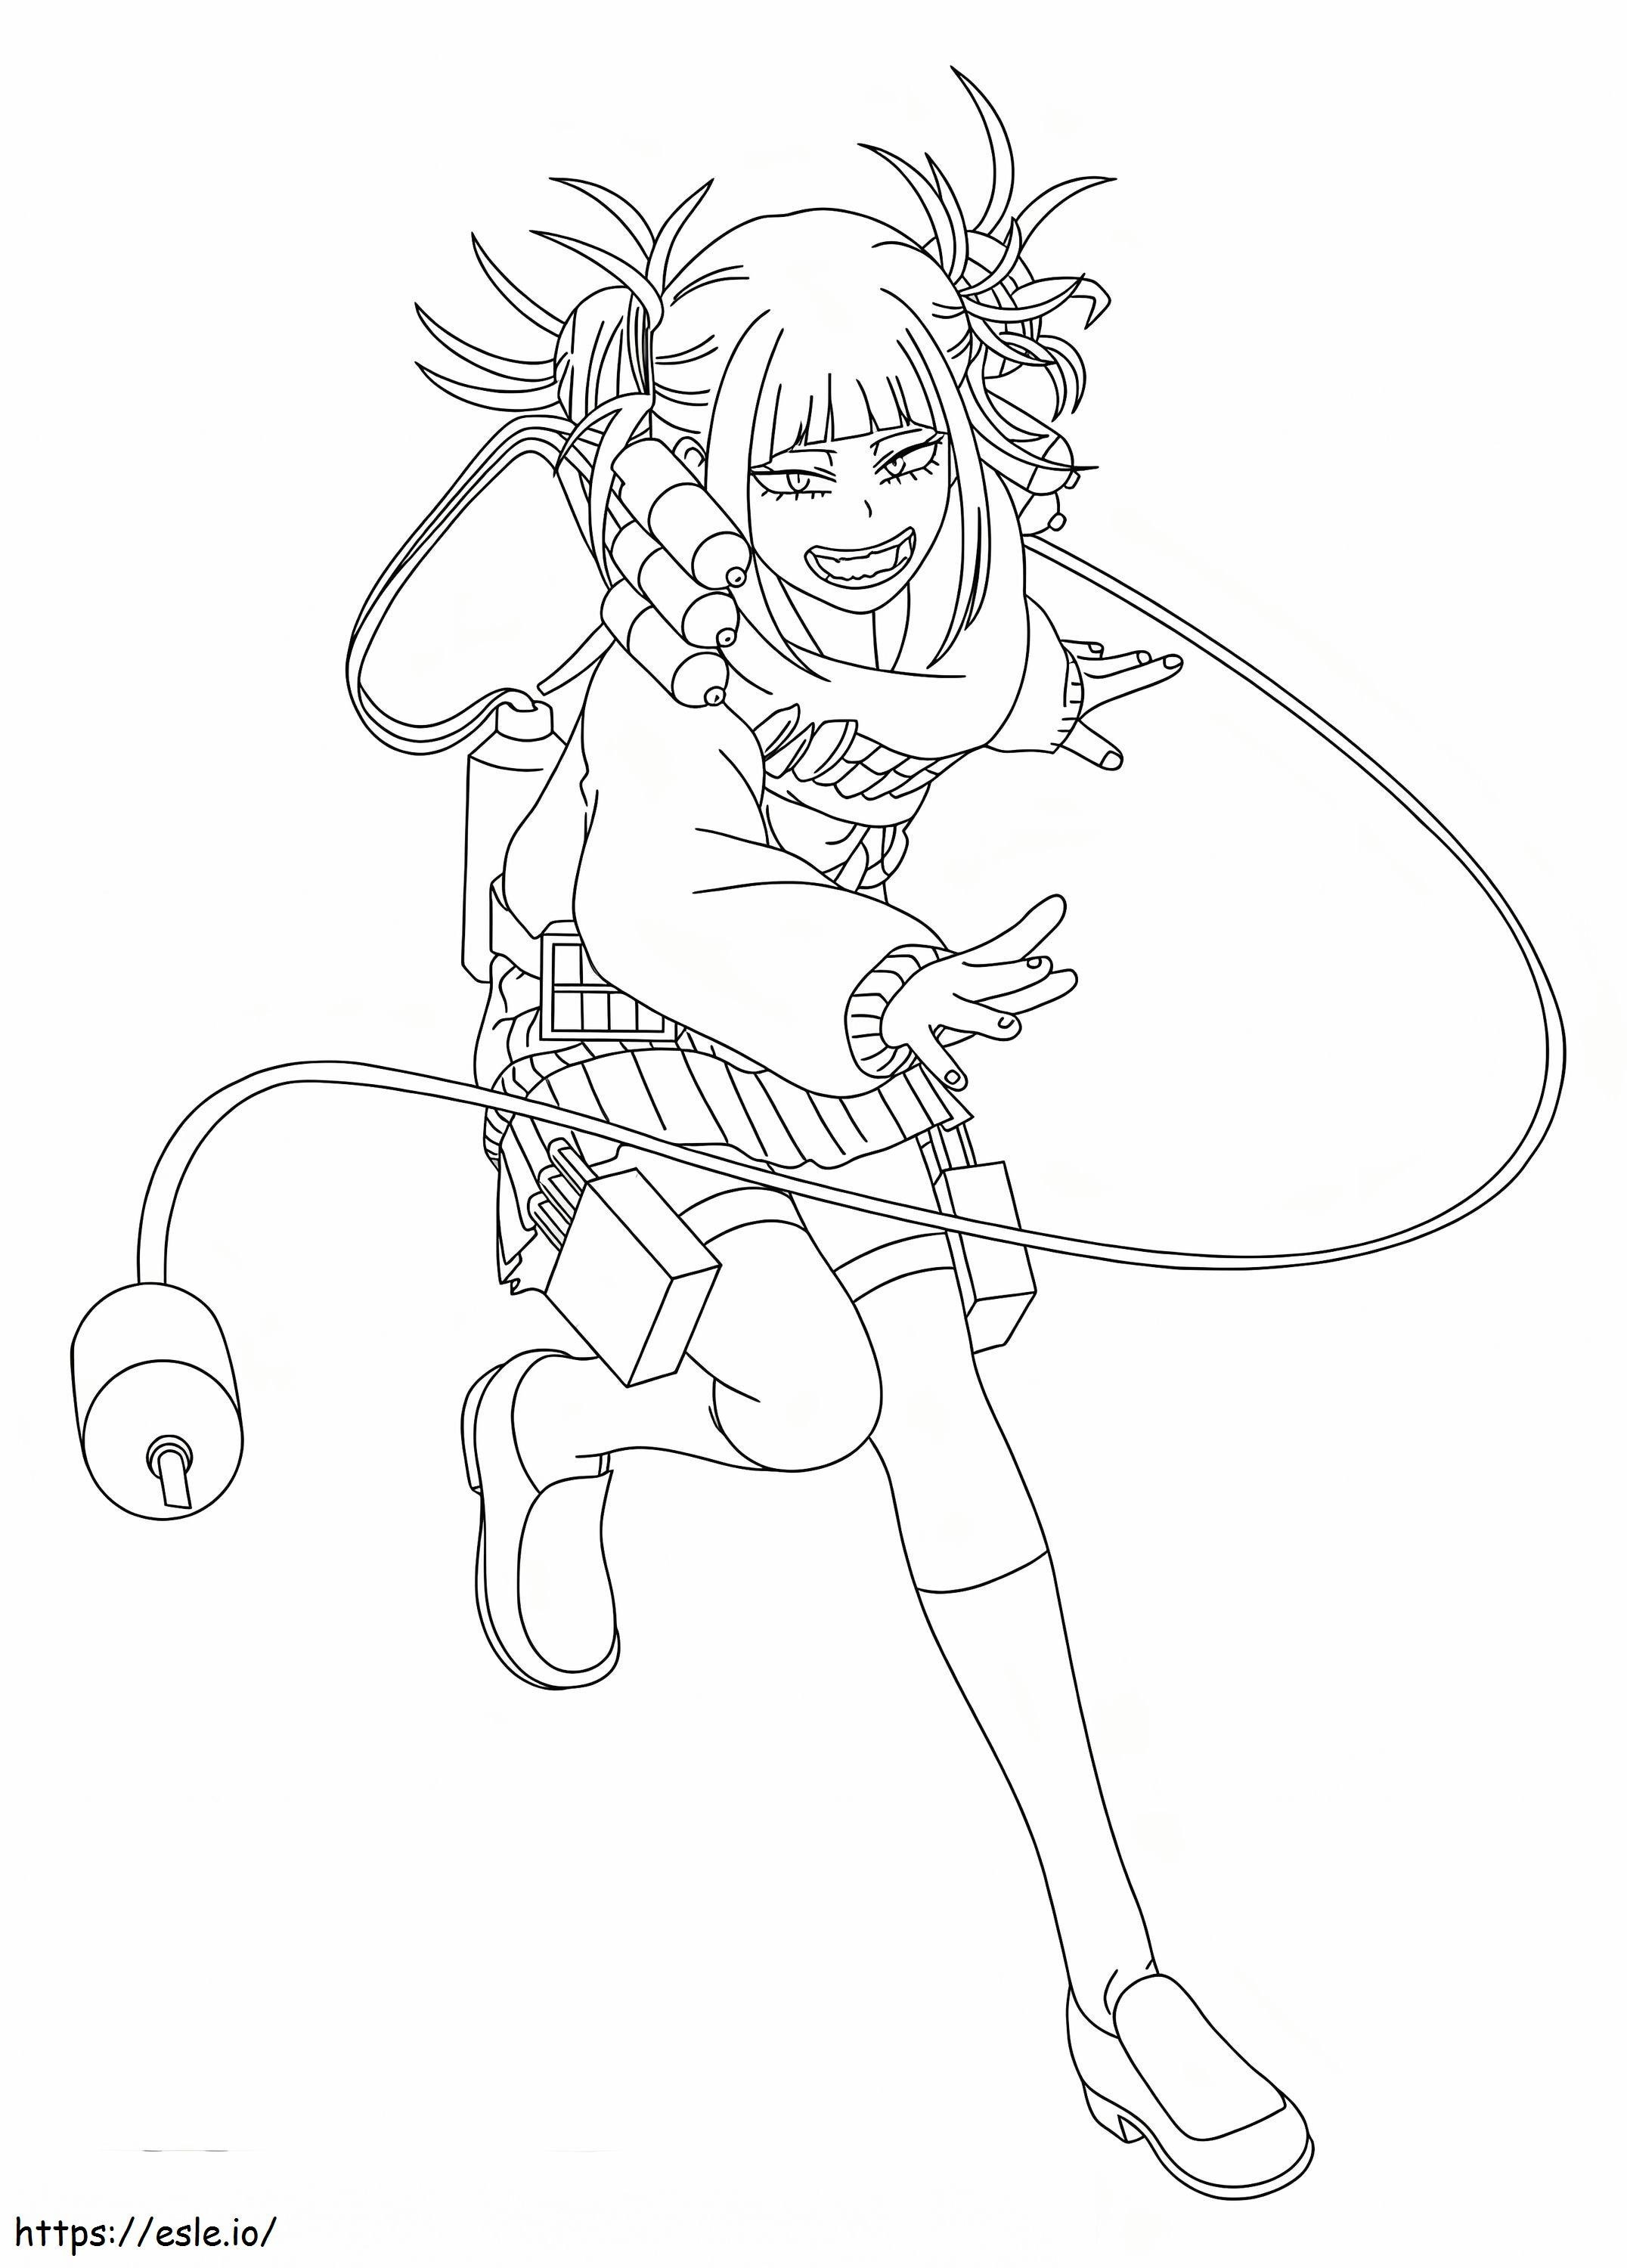 Toga Himiko coloring page